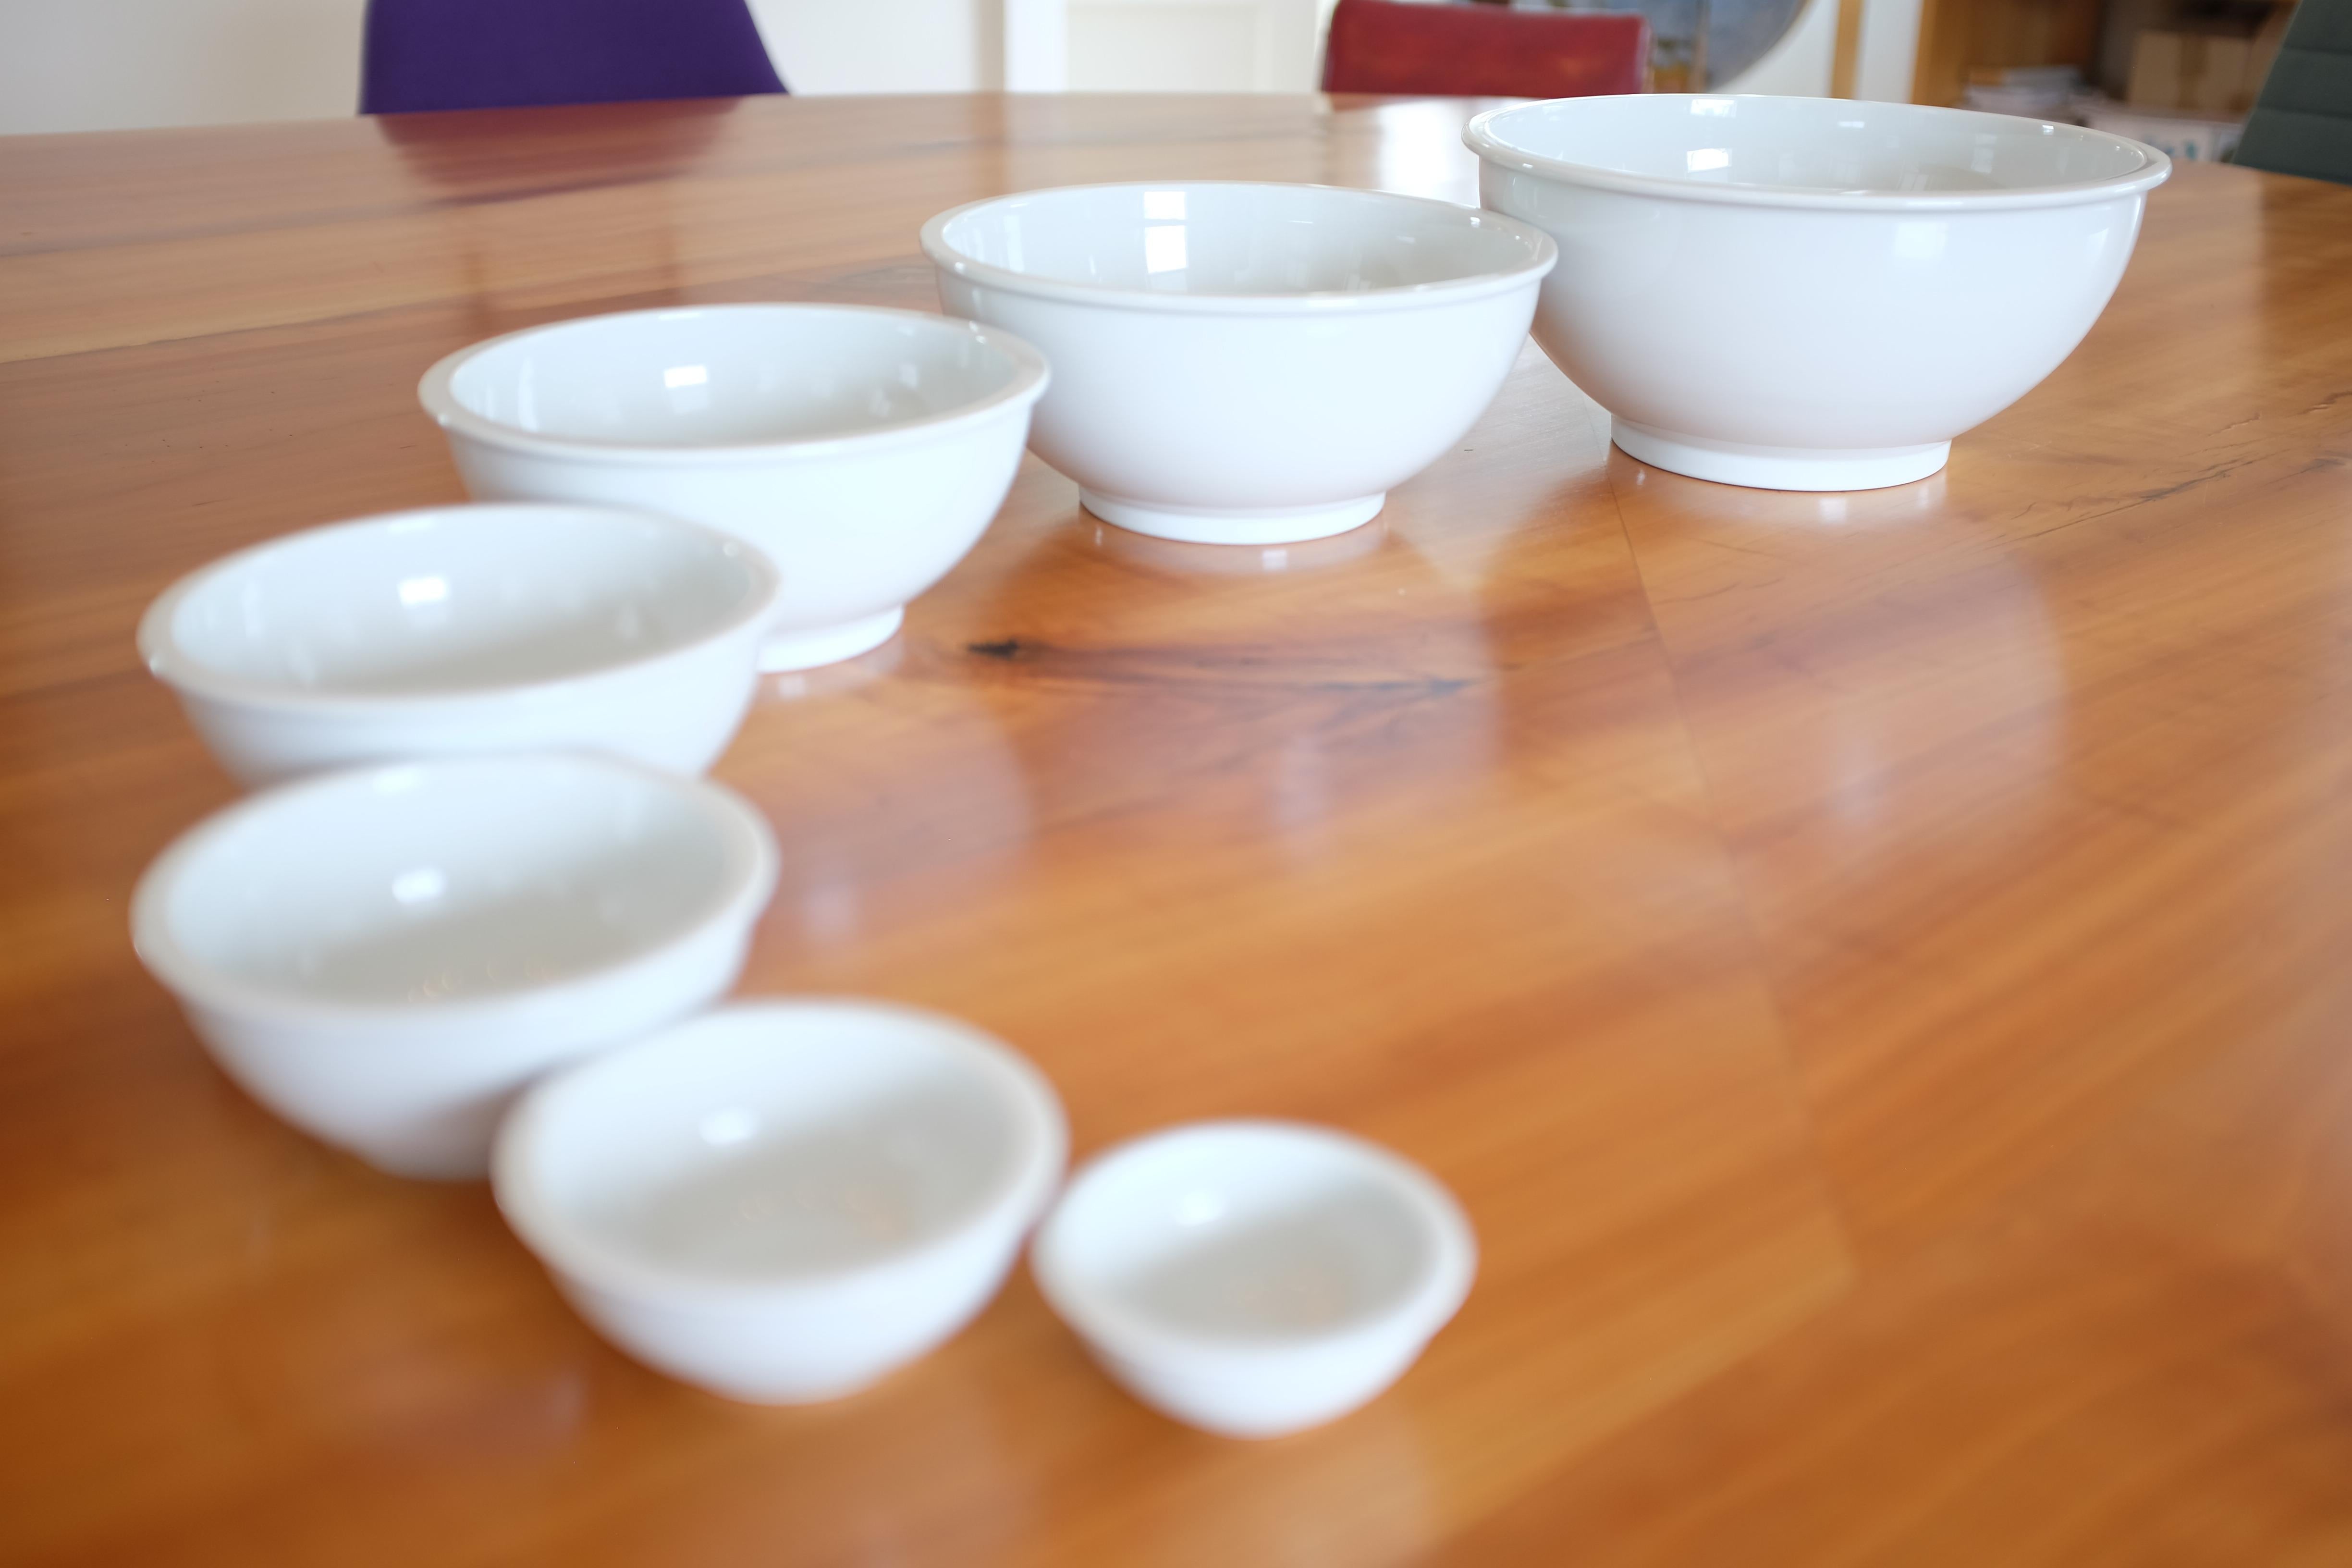 Studio Pieter Stockmans 7 in 1 White Bowls In New Condition For Sale In New Milford, CT